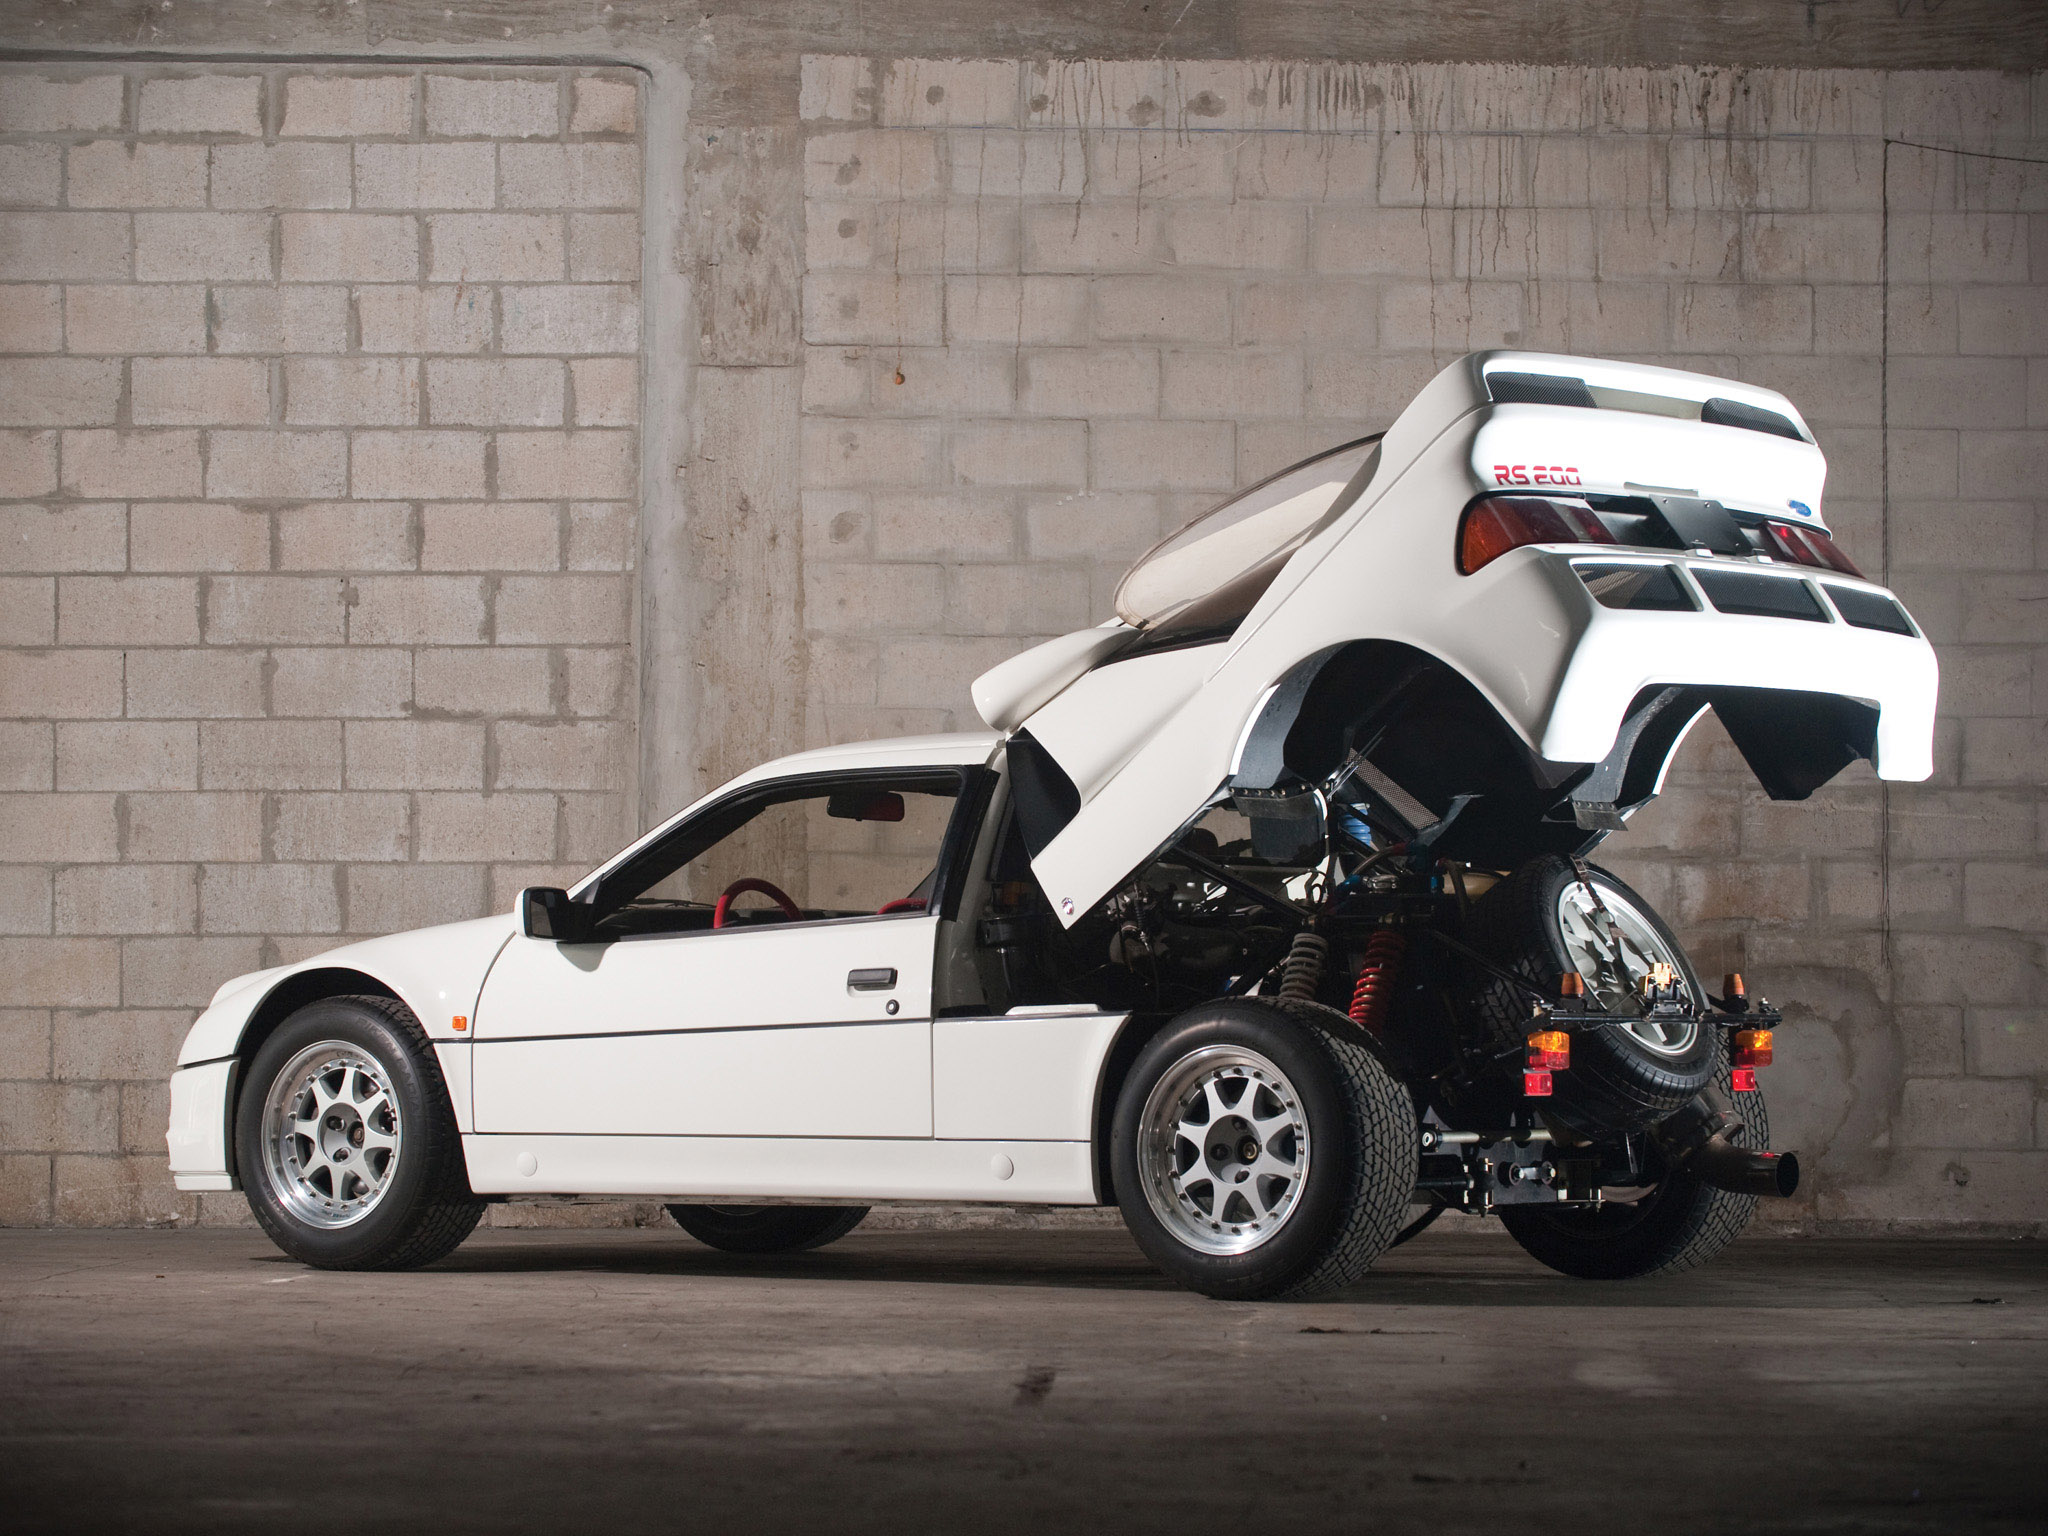 1984, Ford, Rs200, Supercar, Supercars, Classic, Race, Racing, Engine, Engines, Wheel, Wheels Wallpaper